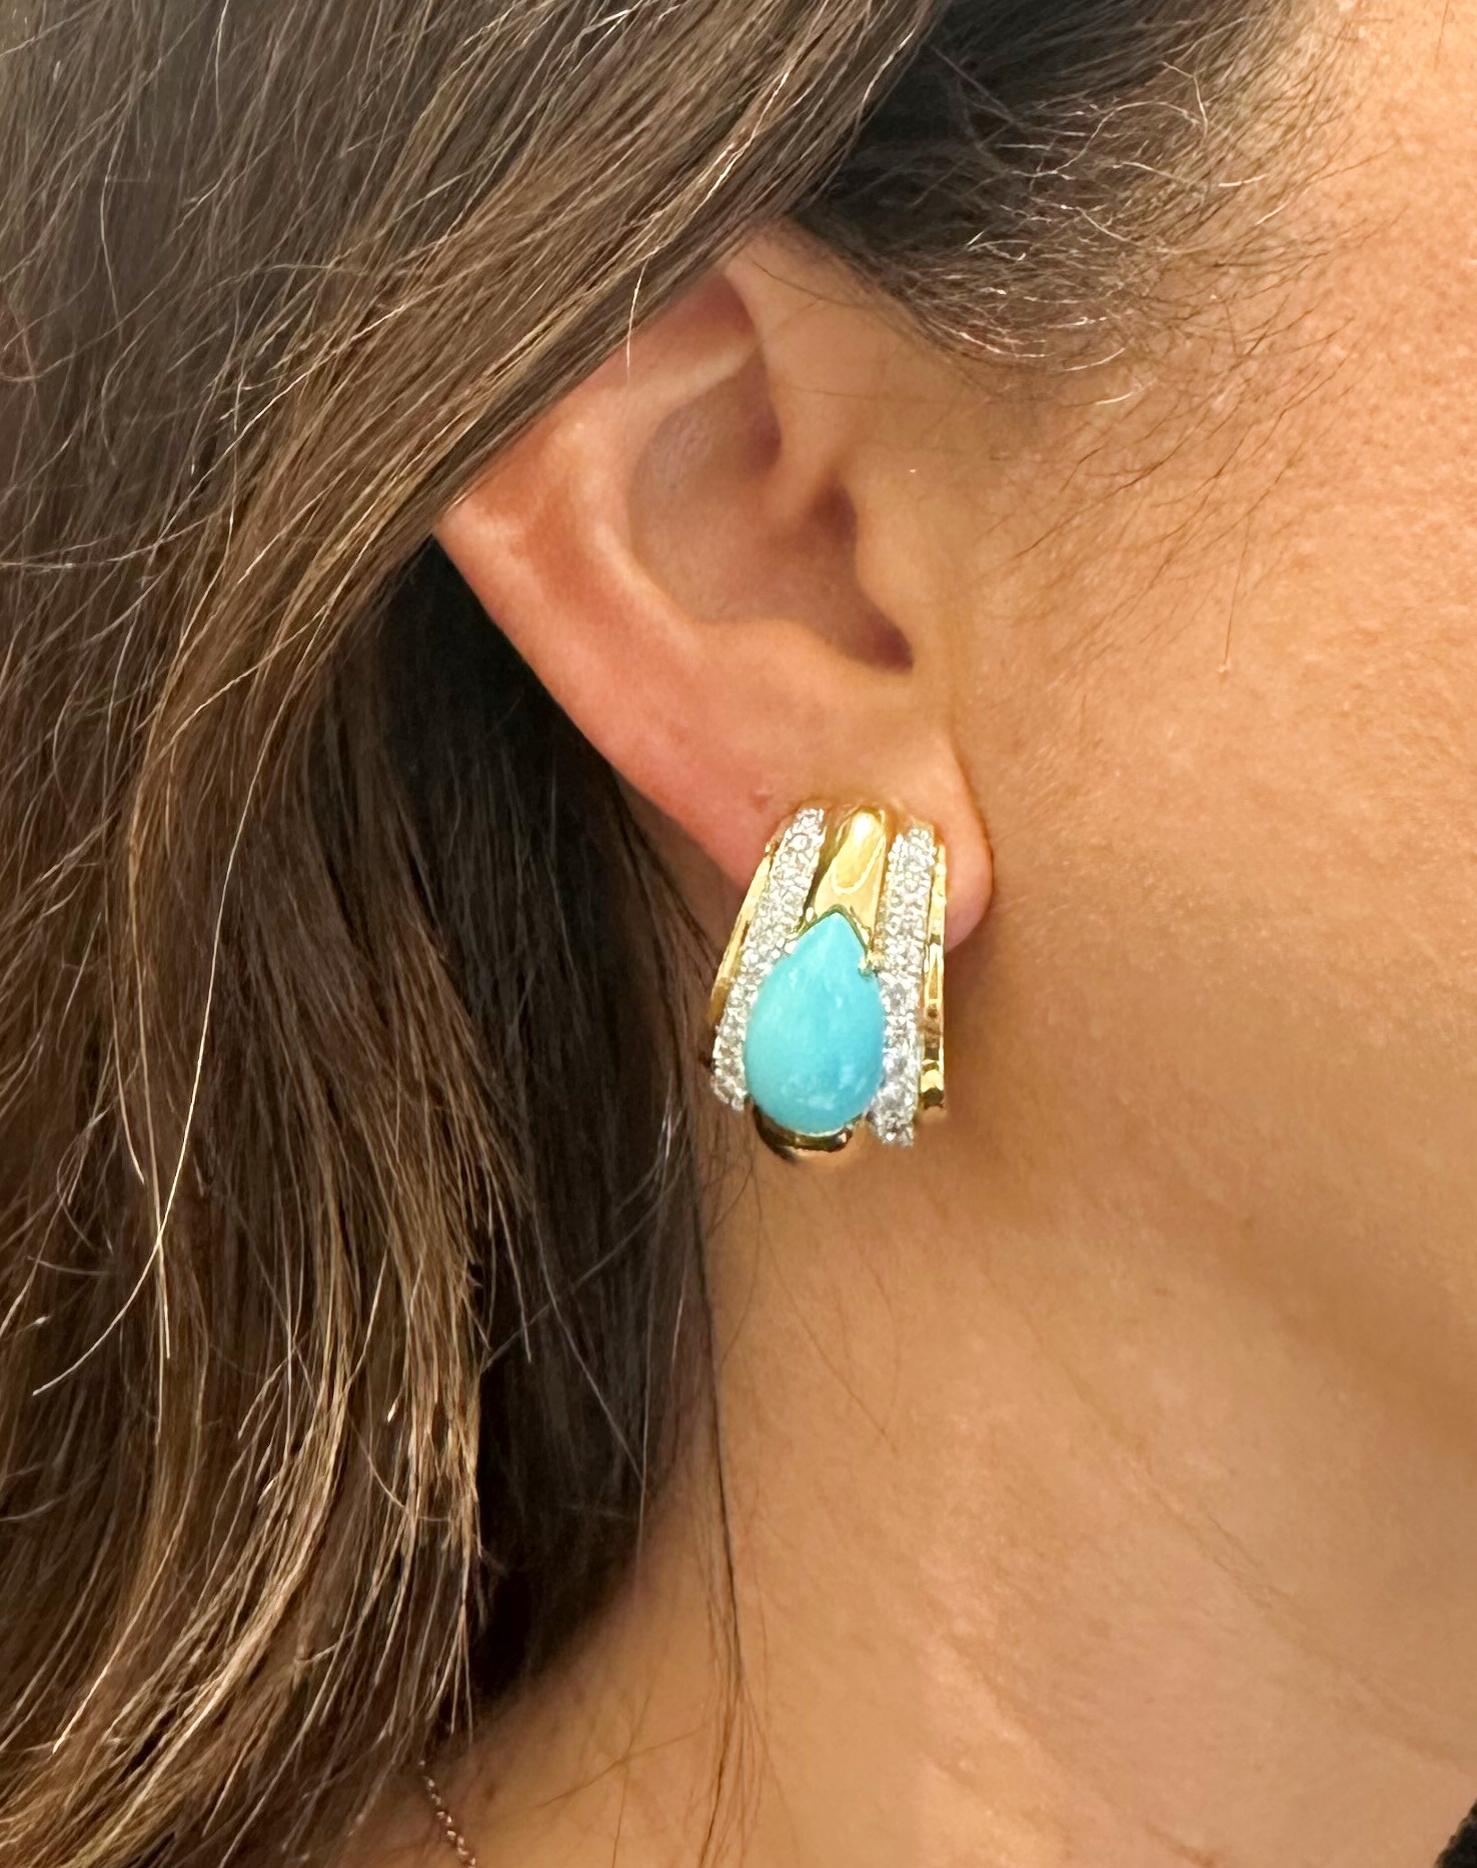 From designer David Webb, 18 karat yellow gold and platinum turquoise and diamond half hoop clip earrings. These earrings are crafted with 2 pear shape cabochon cut turquoise stones in the center of the half hoops. Additionally, 2 row of 48